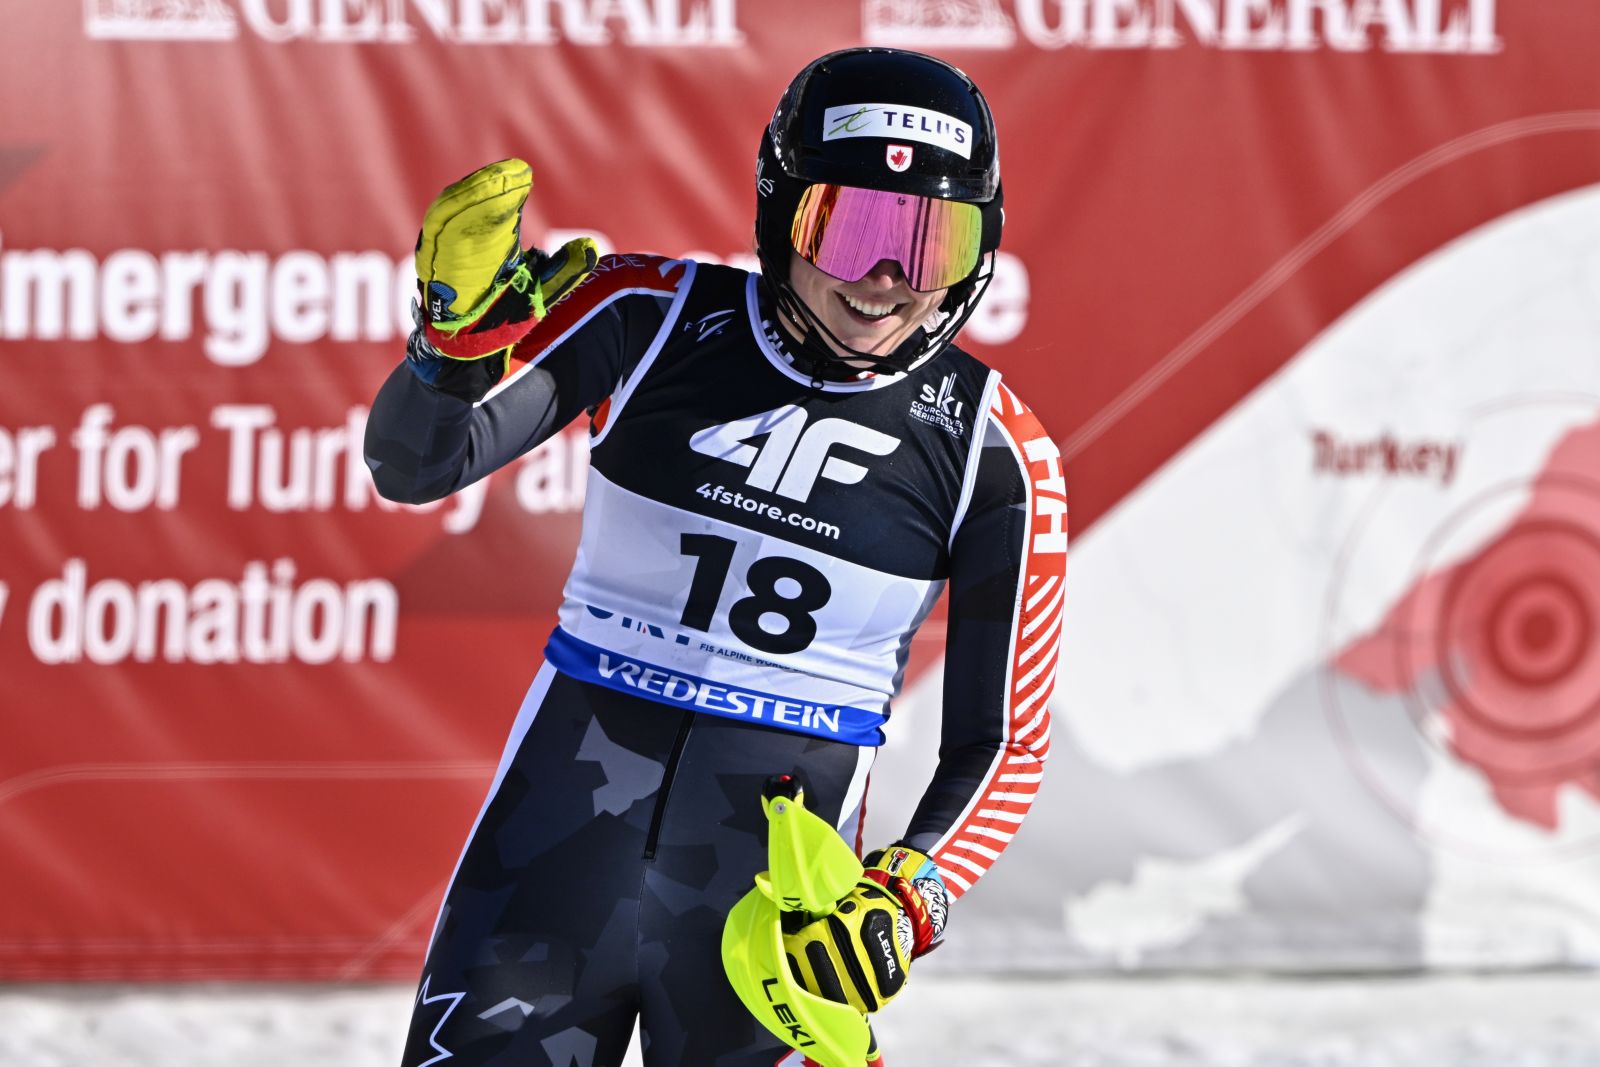 epa10474851 Laurence St-Germain of Canada reacts in the finish area during the second run of the women's slalom race at the FIS Alpine Skiing World Championships in Meribel, France, 18 February 2023.  EPA/JEAN-CHRISTOPHE BOTT